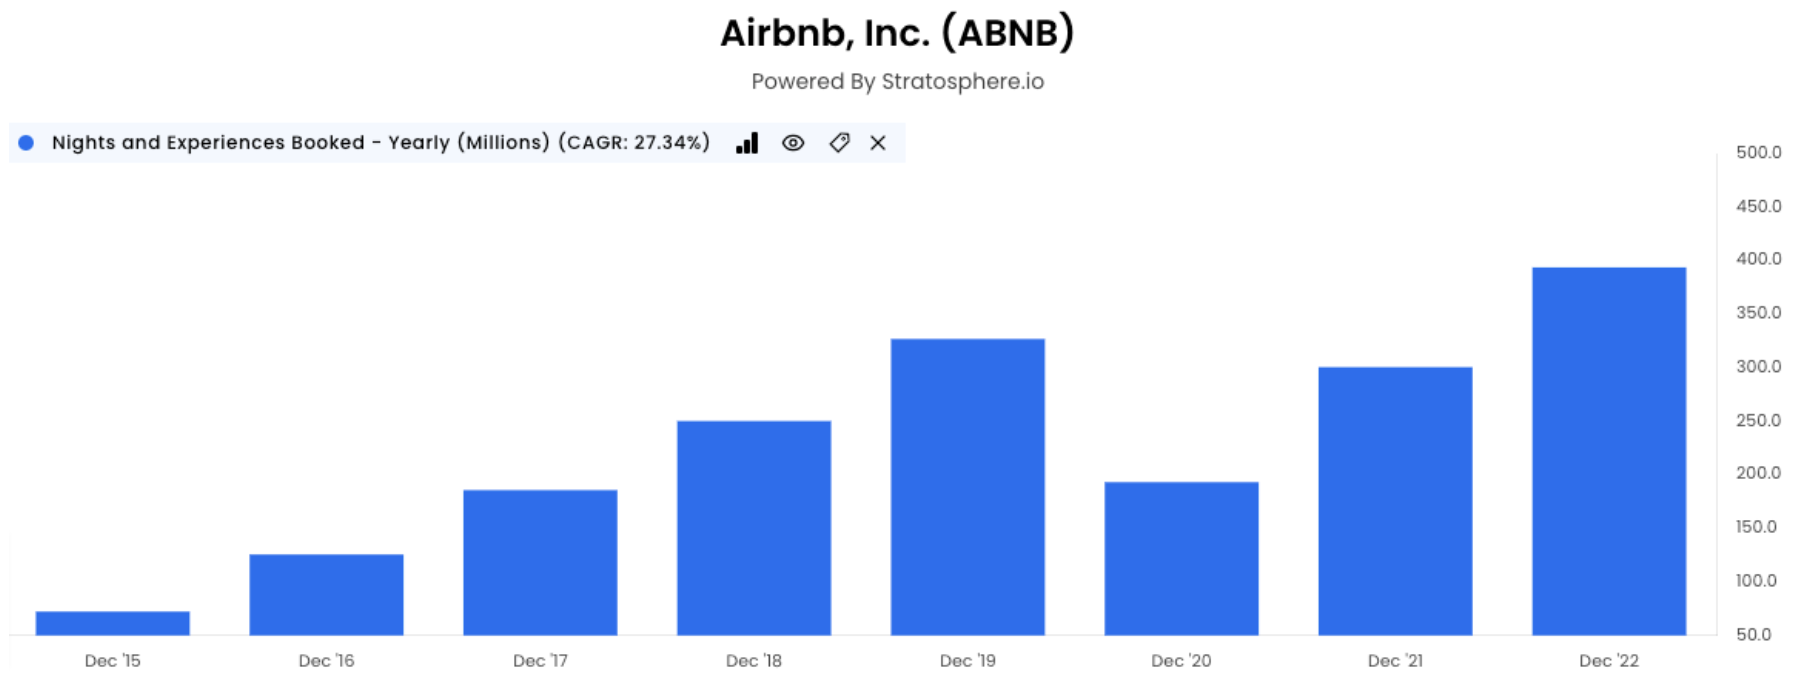 Airbnb Inc. nights and experiences booked graph